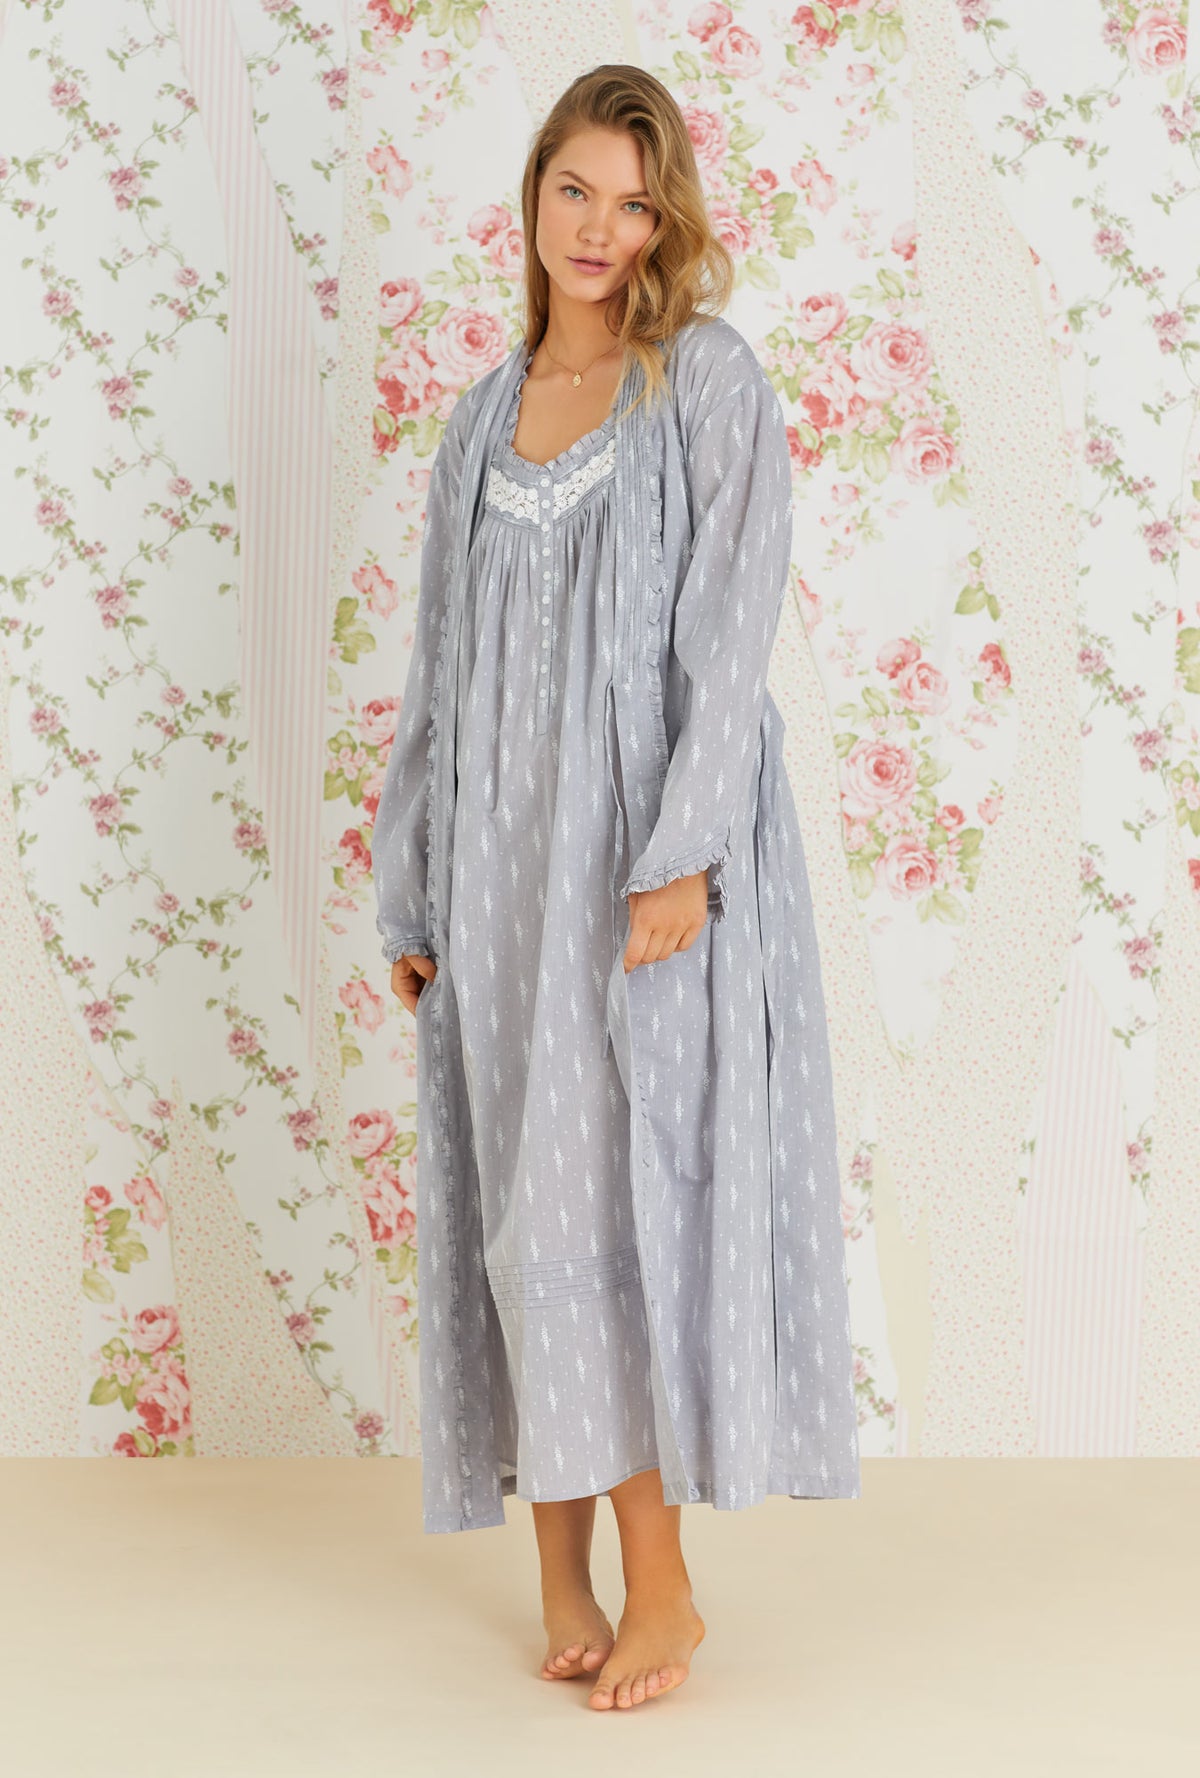 A lady wearing grey sleeveless cotton nightgown with chambray floral print.